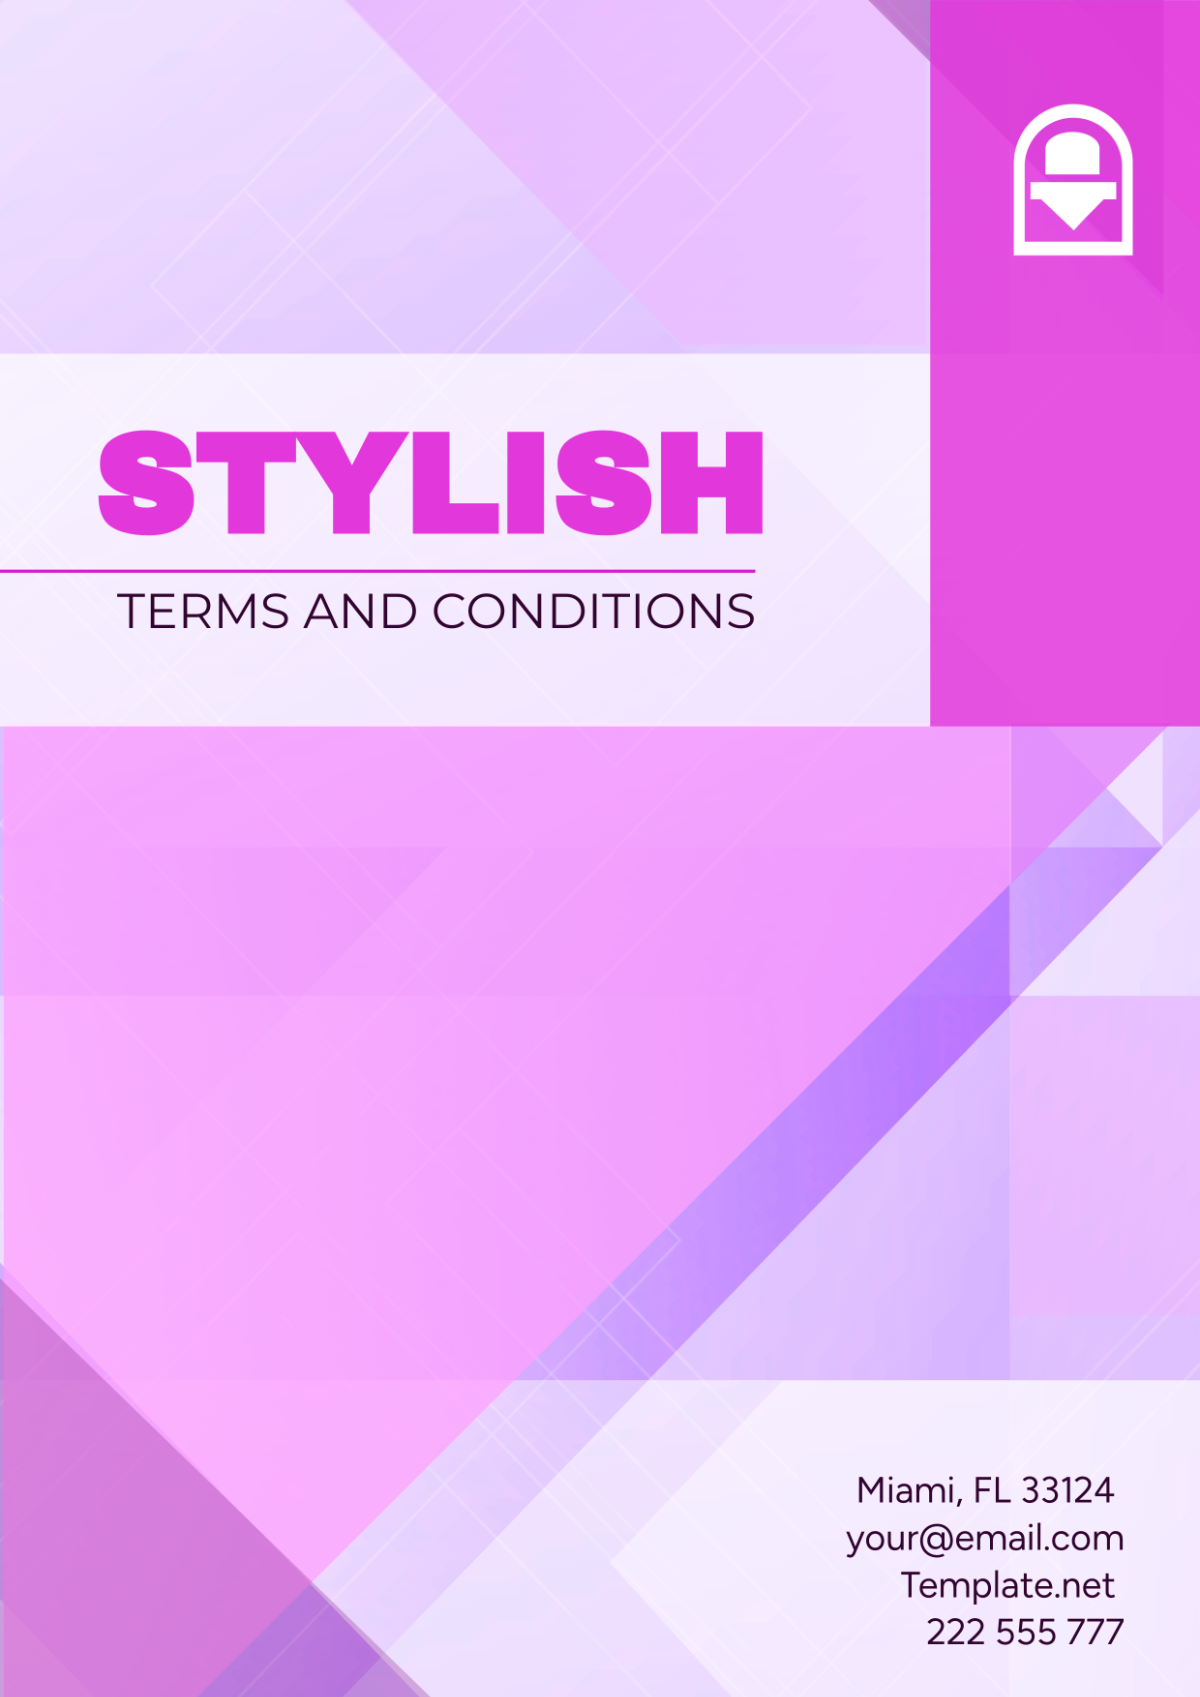 Stylish Terms and Conditions Cover Page